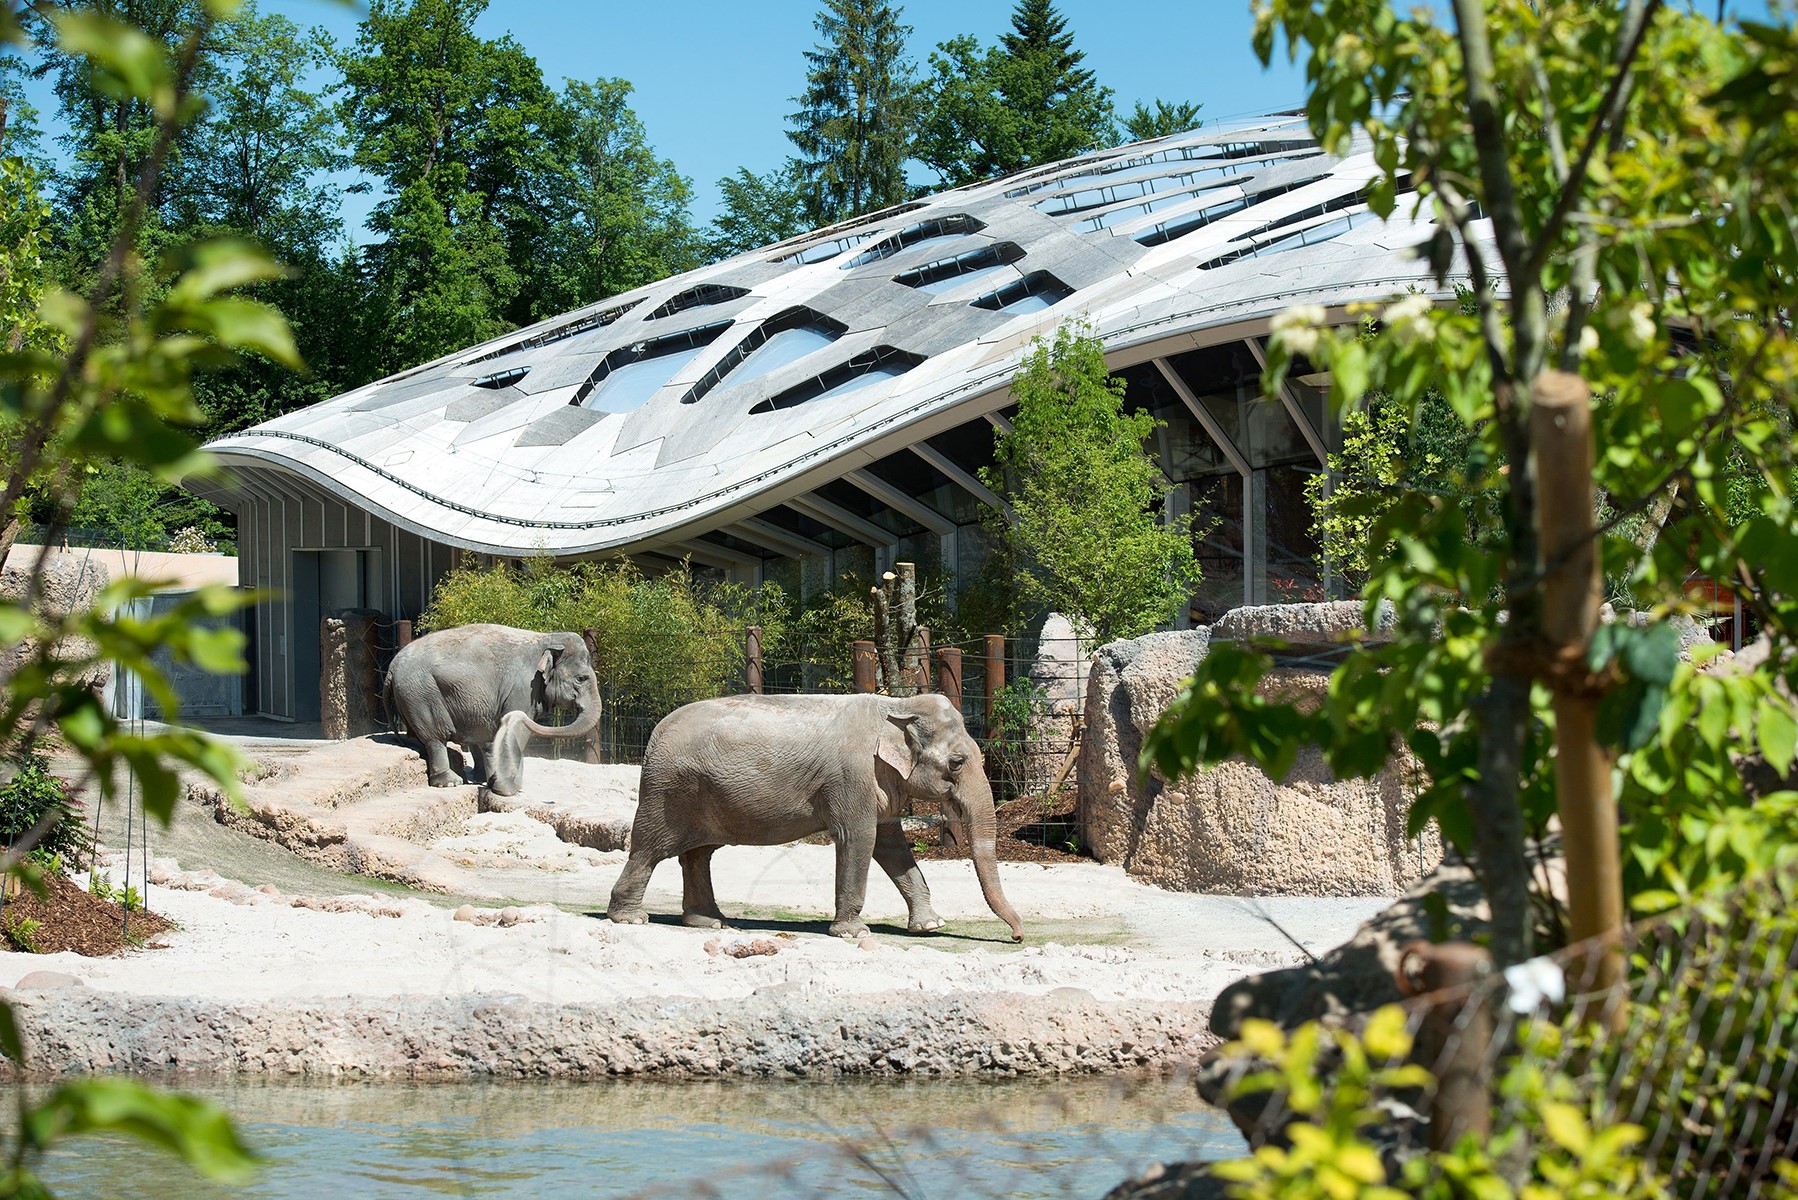 Elephants in the outdoor area of the Kaeng Krachan Elephant Park, with the indoor enclosure in the background (image: Jean-Luc Grossmann / Zoo Zurich)